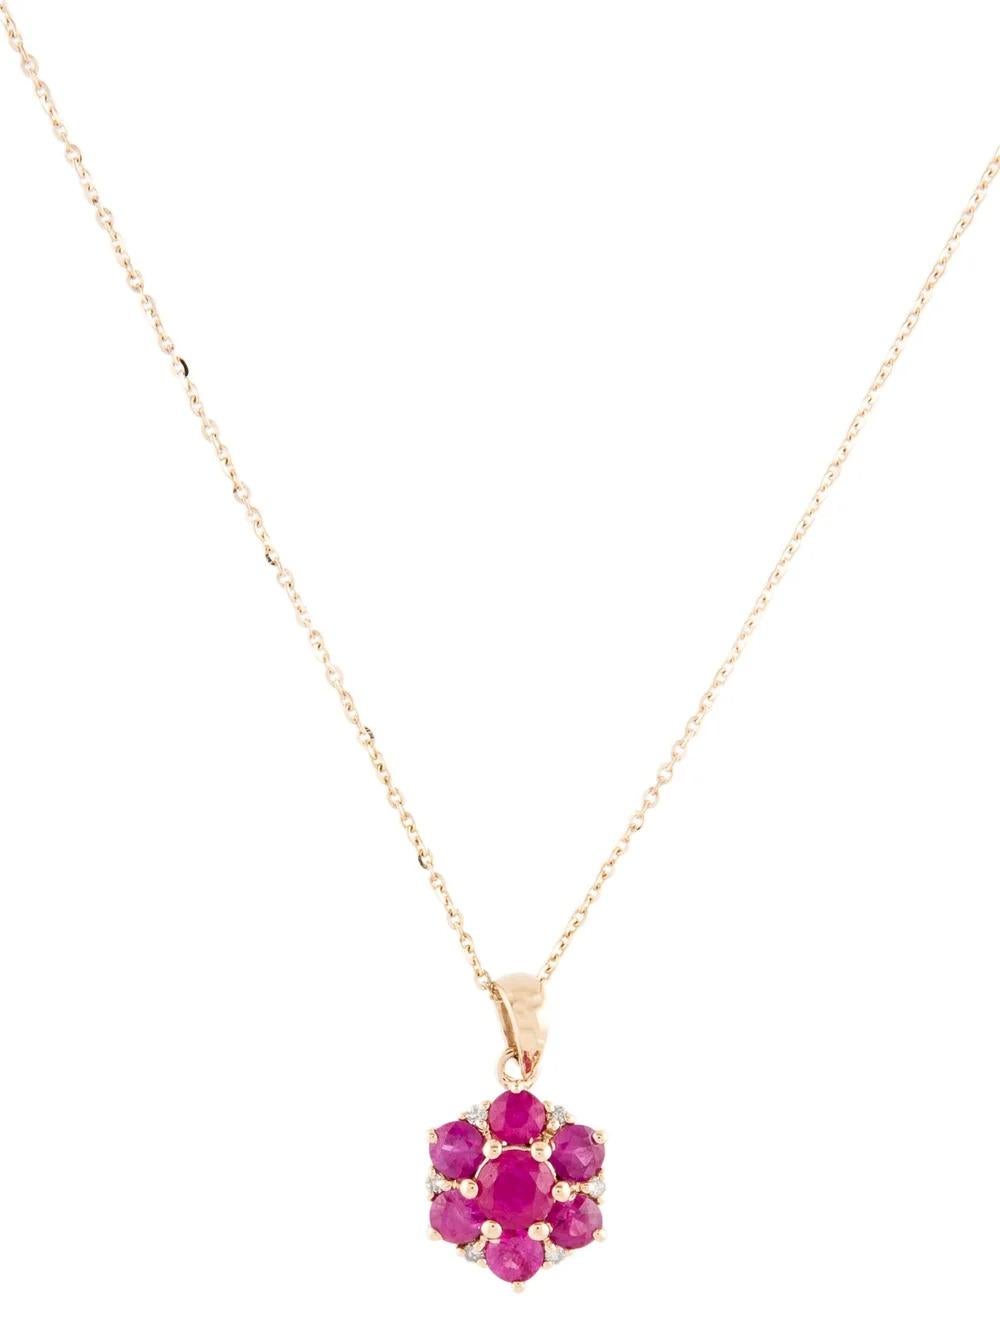 Indulge in the enchanting allure of this stunning 14K yellow gold pendant necklace, meticulously crafted to captivate with its exquisite design. Adorned with a vibrant 1.09 carat round brilliant ruby, this piece exudes timeless elegance and